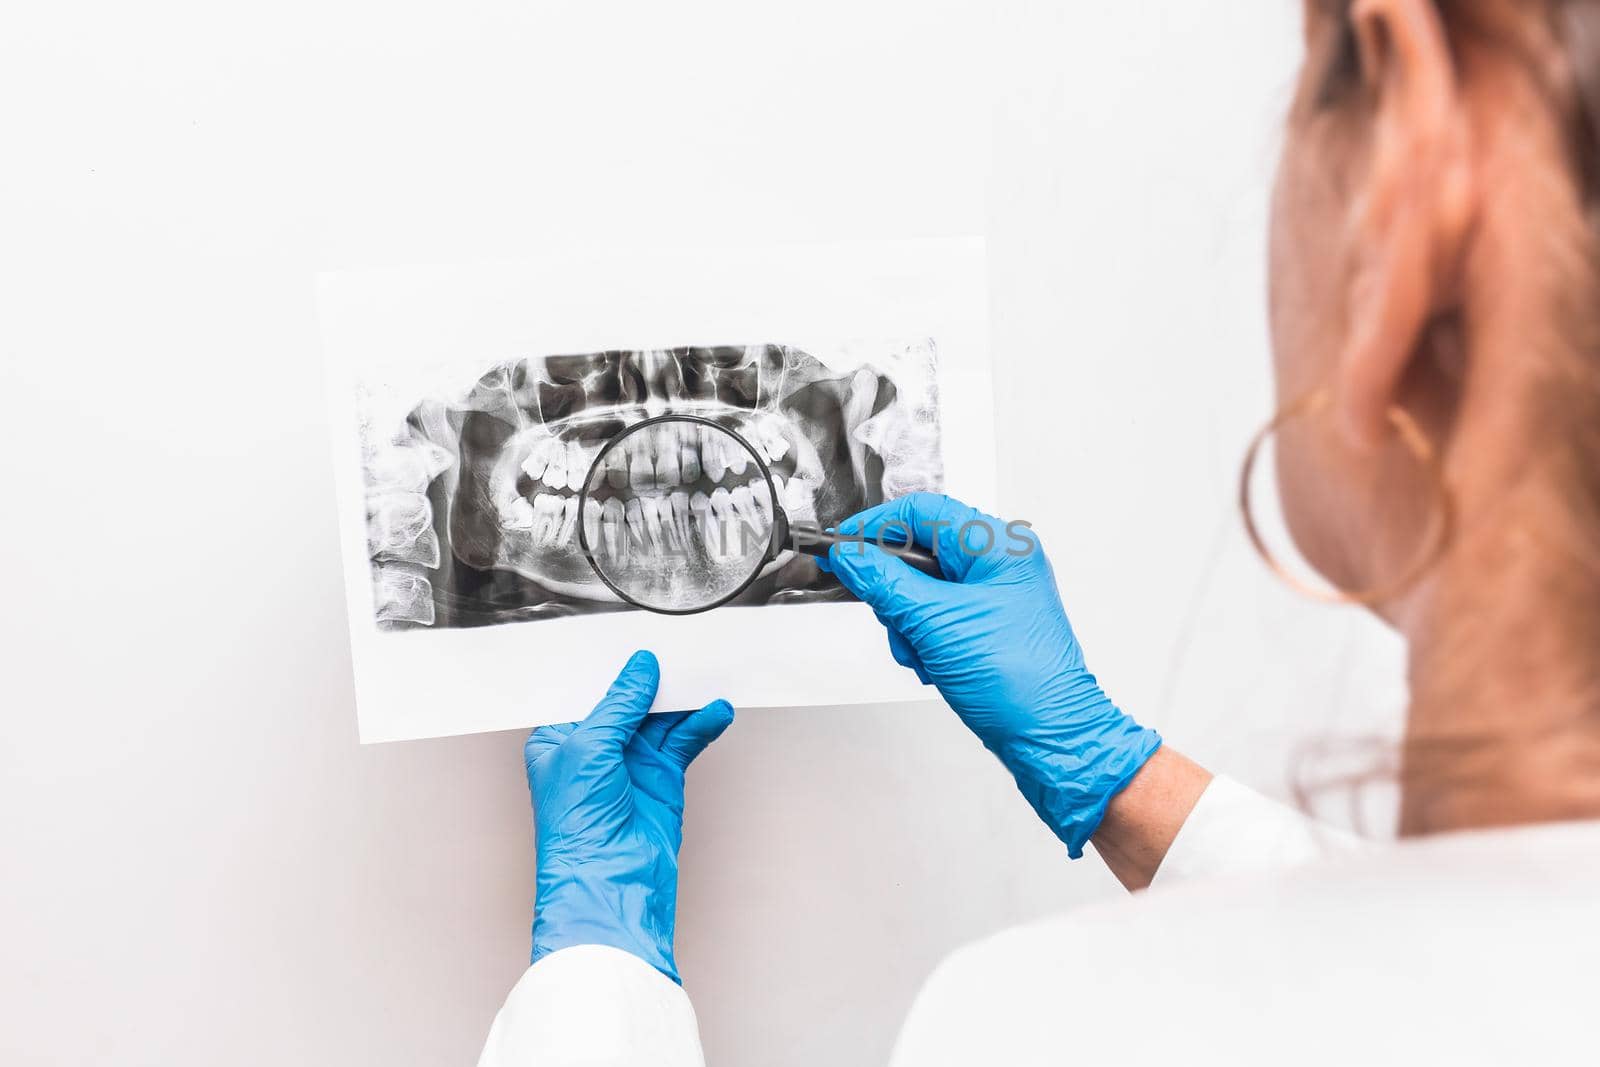 A woman doctor in protective medical gloves holds an X-ray picture of teeth in her hands and examines it through a magnifying glass on a white background, close up.